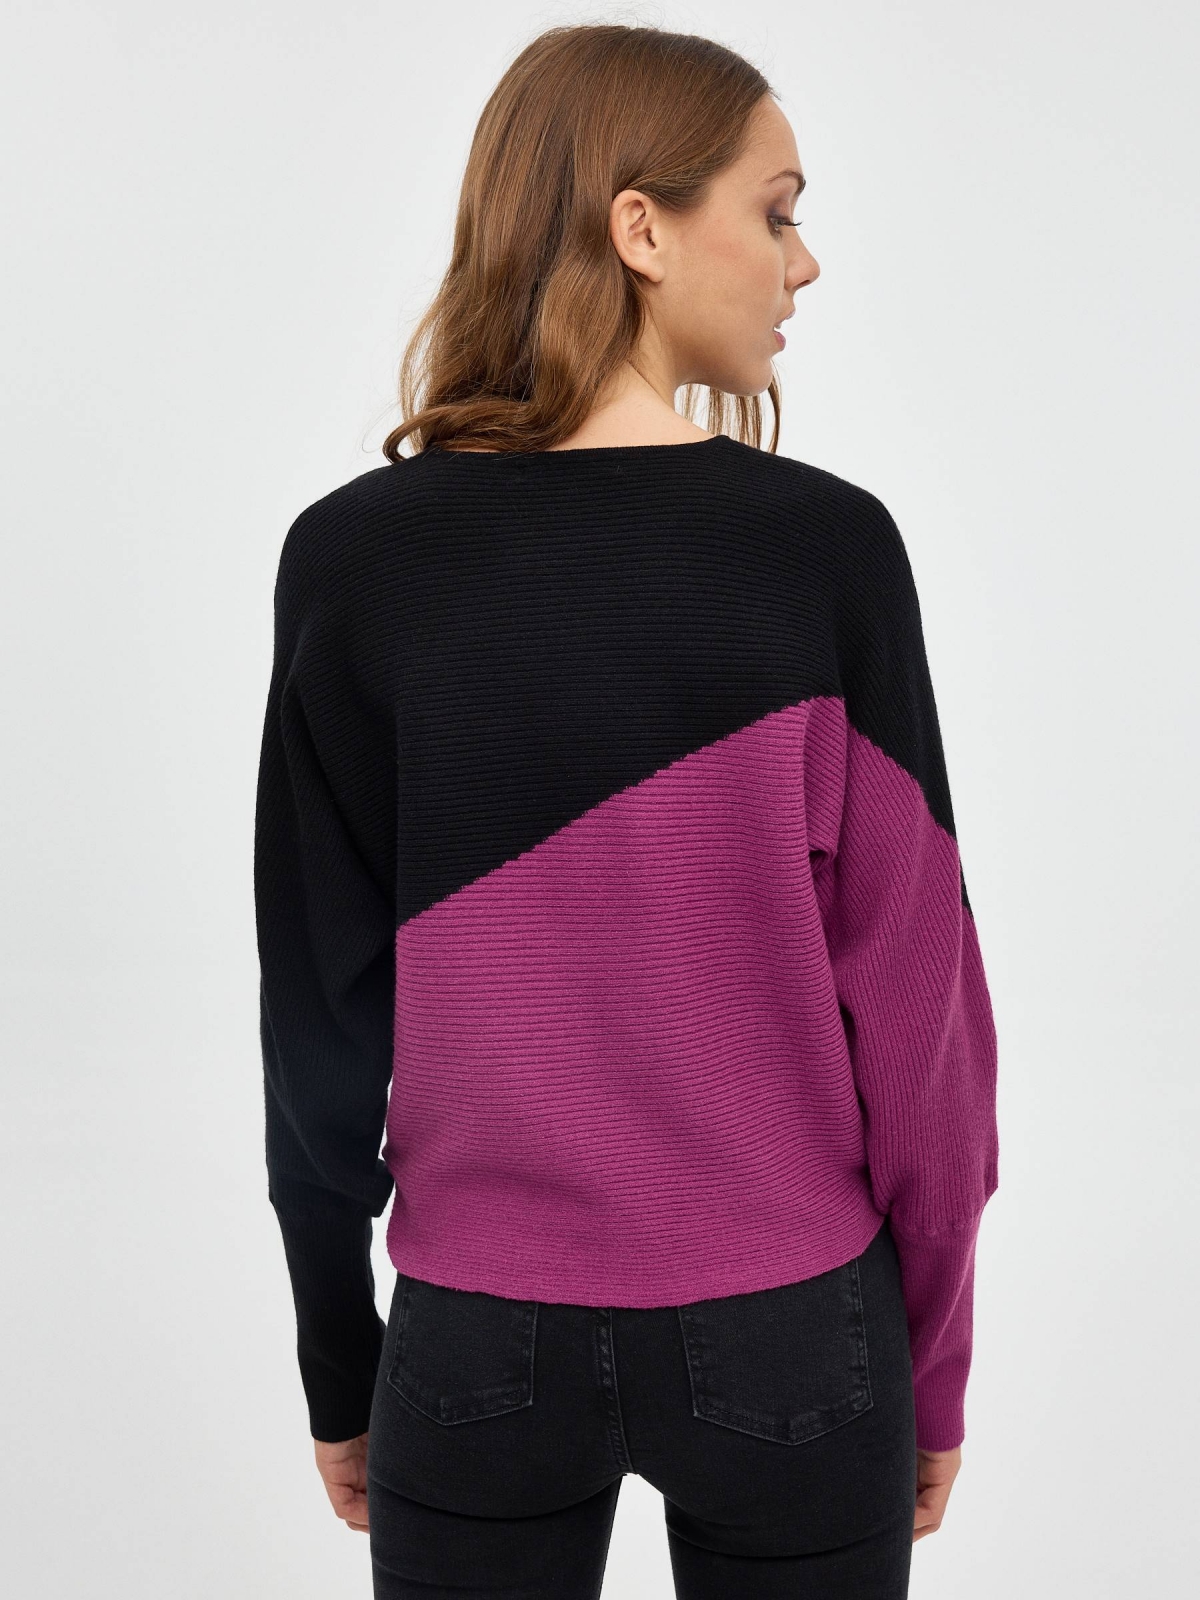 Balloon sleeve sweater fuchsia middle back view